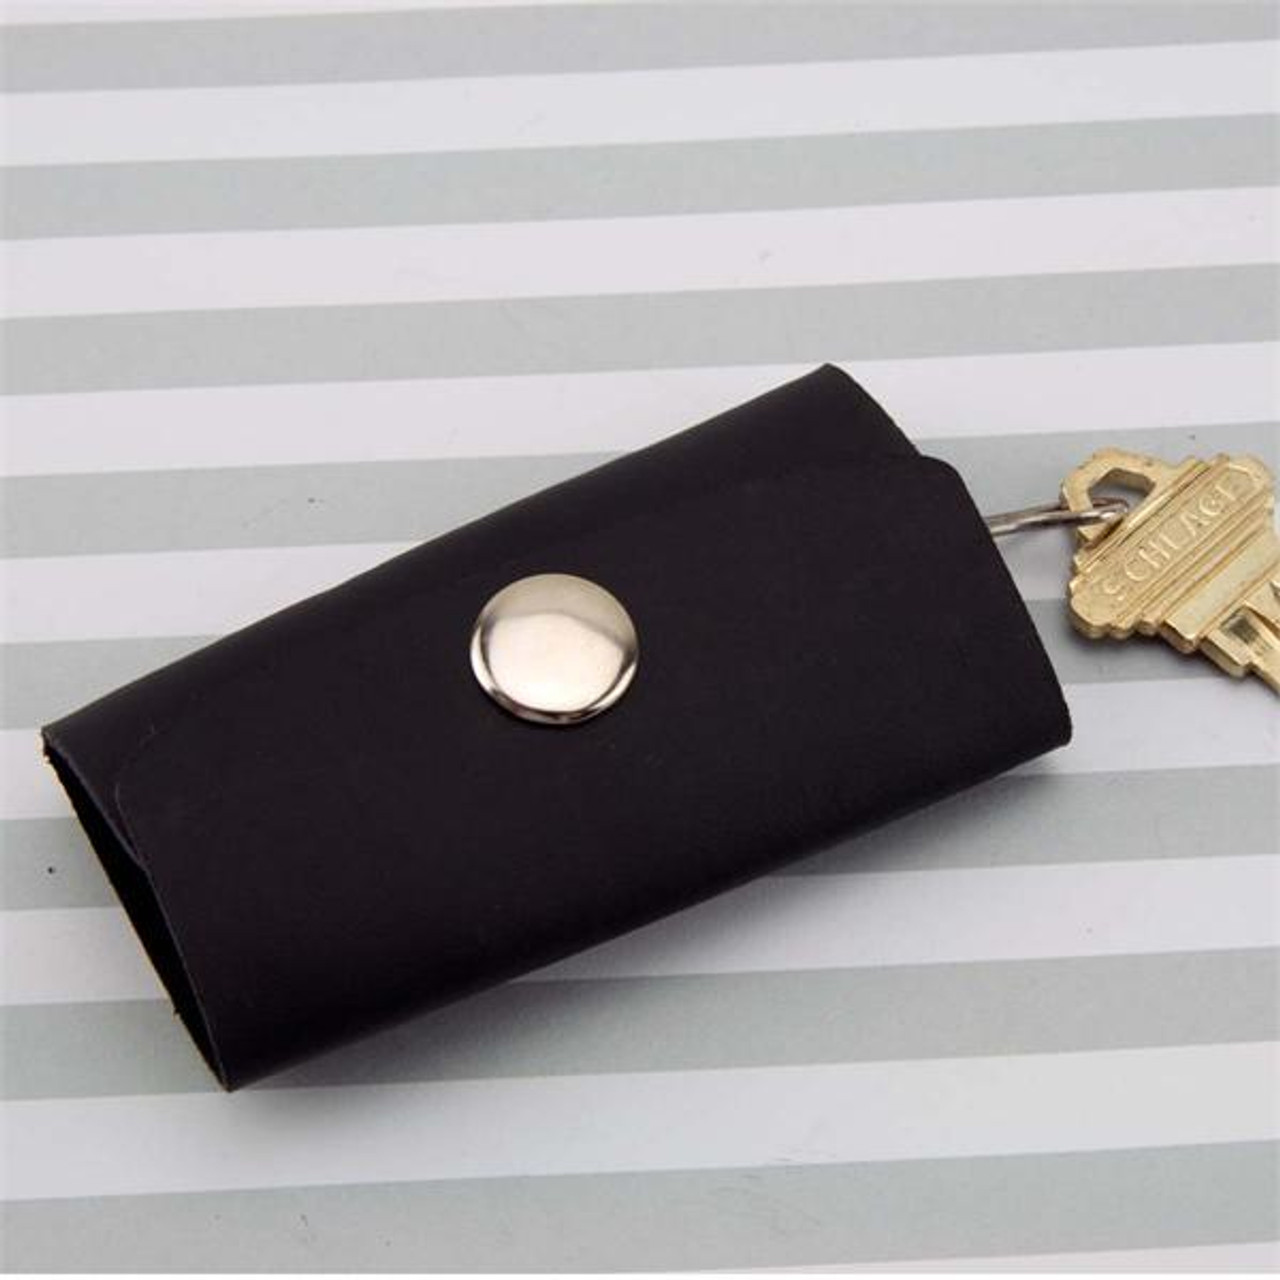 Shop for and Buy 4 Hook Leather Key Case Heavy Duty at